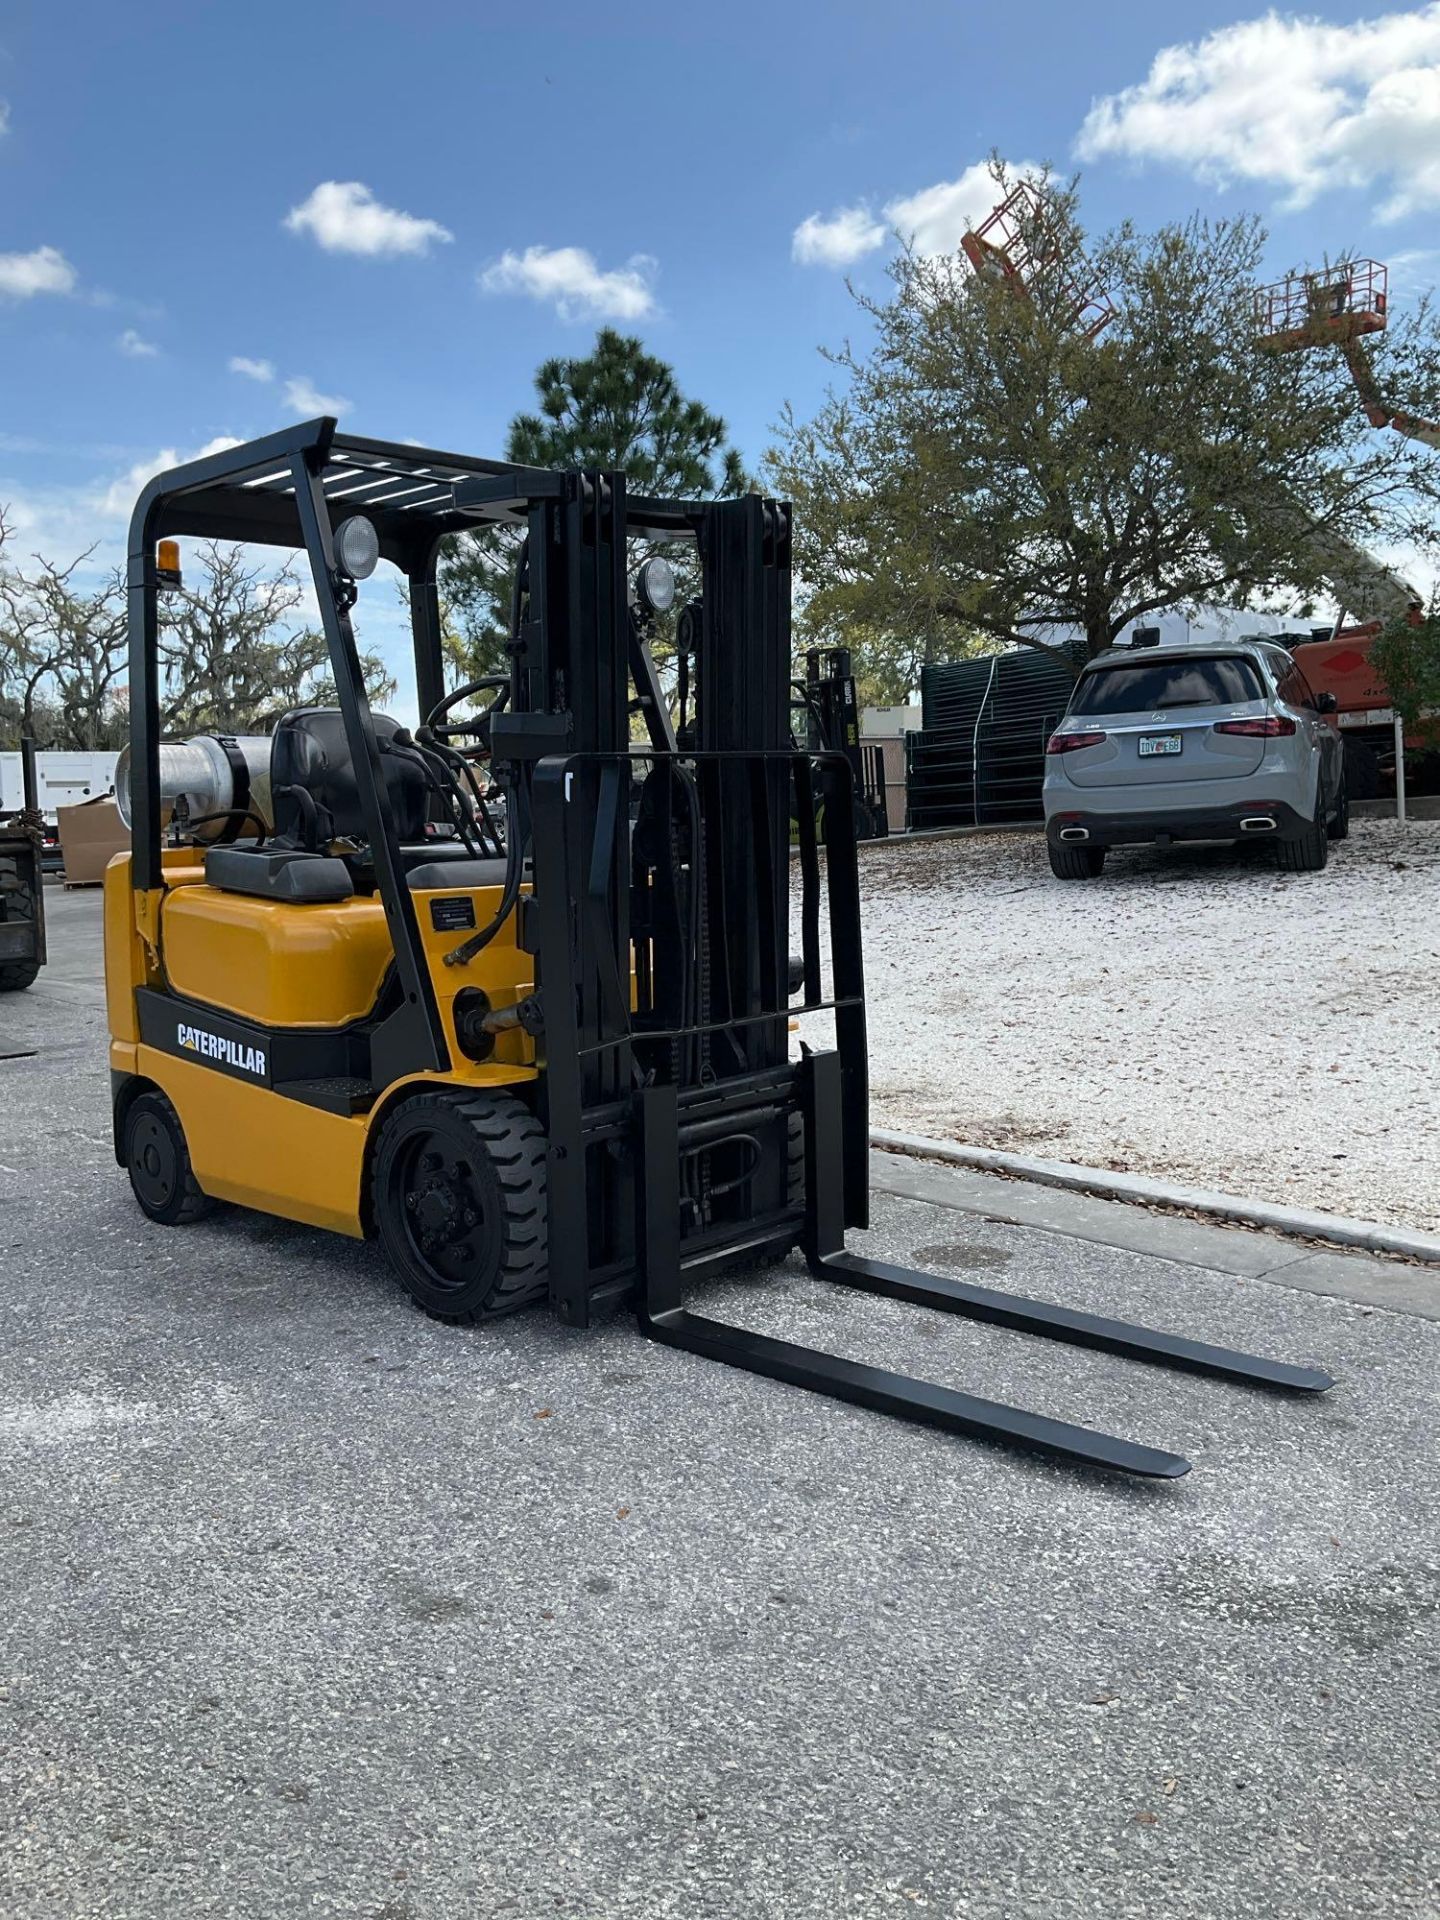 CATERPILLAR FORKLIFT MODEL GC20K, LP POWERED, APPROX MAX CAPACITY 4000LBS, APPROX MAX HEIGHT 160" - Image 7 of 12